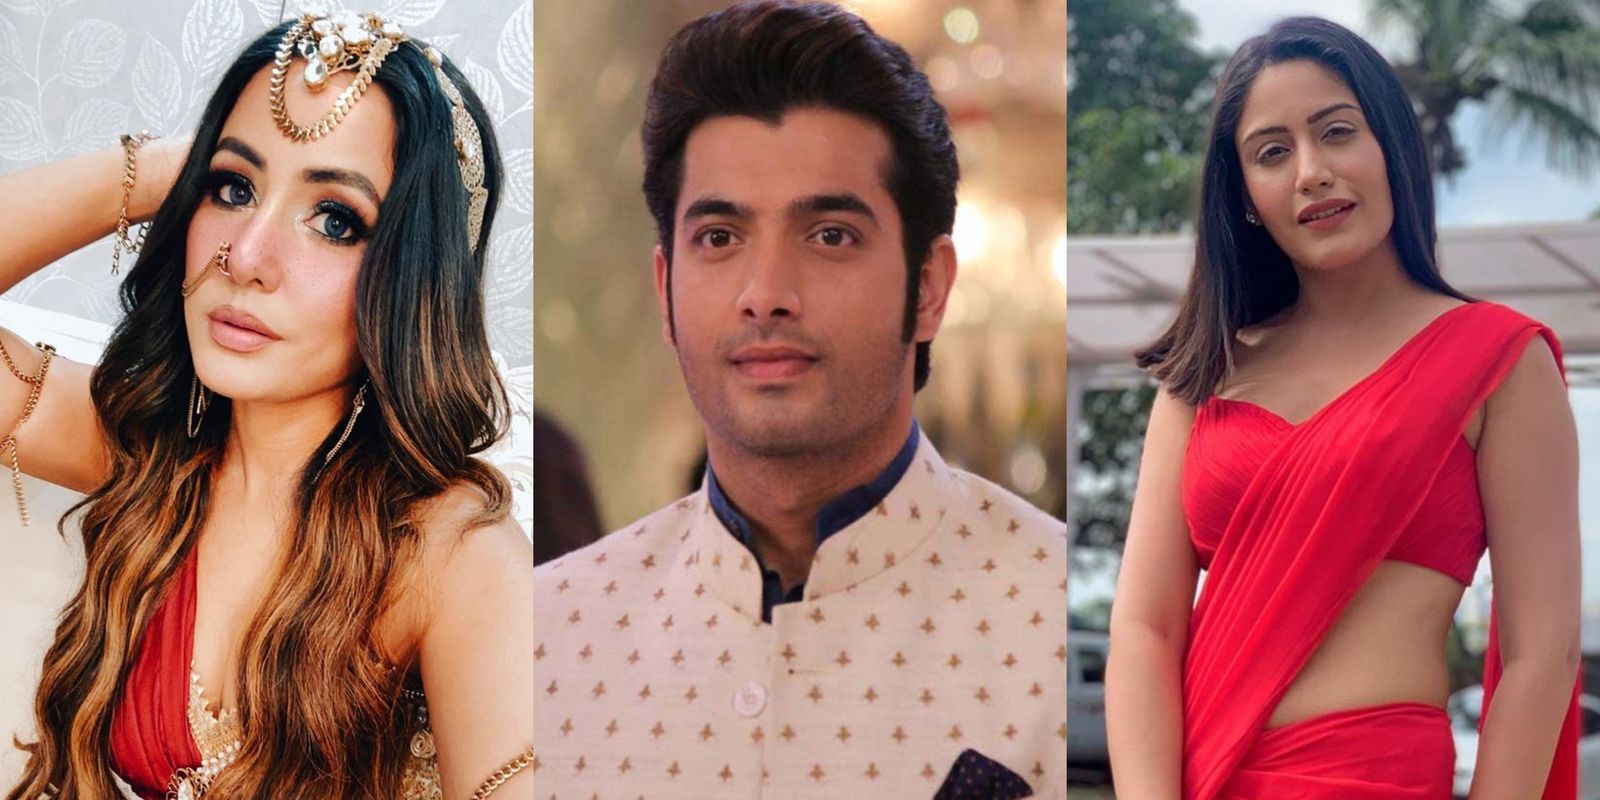 Naagin 5: Sharad Malhotra’s Character To Turn From Negative To Positive In The Hina Khan-Surbhi Chandna Starrer?